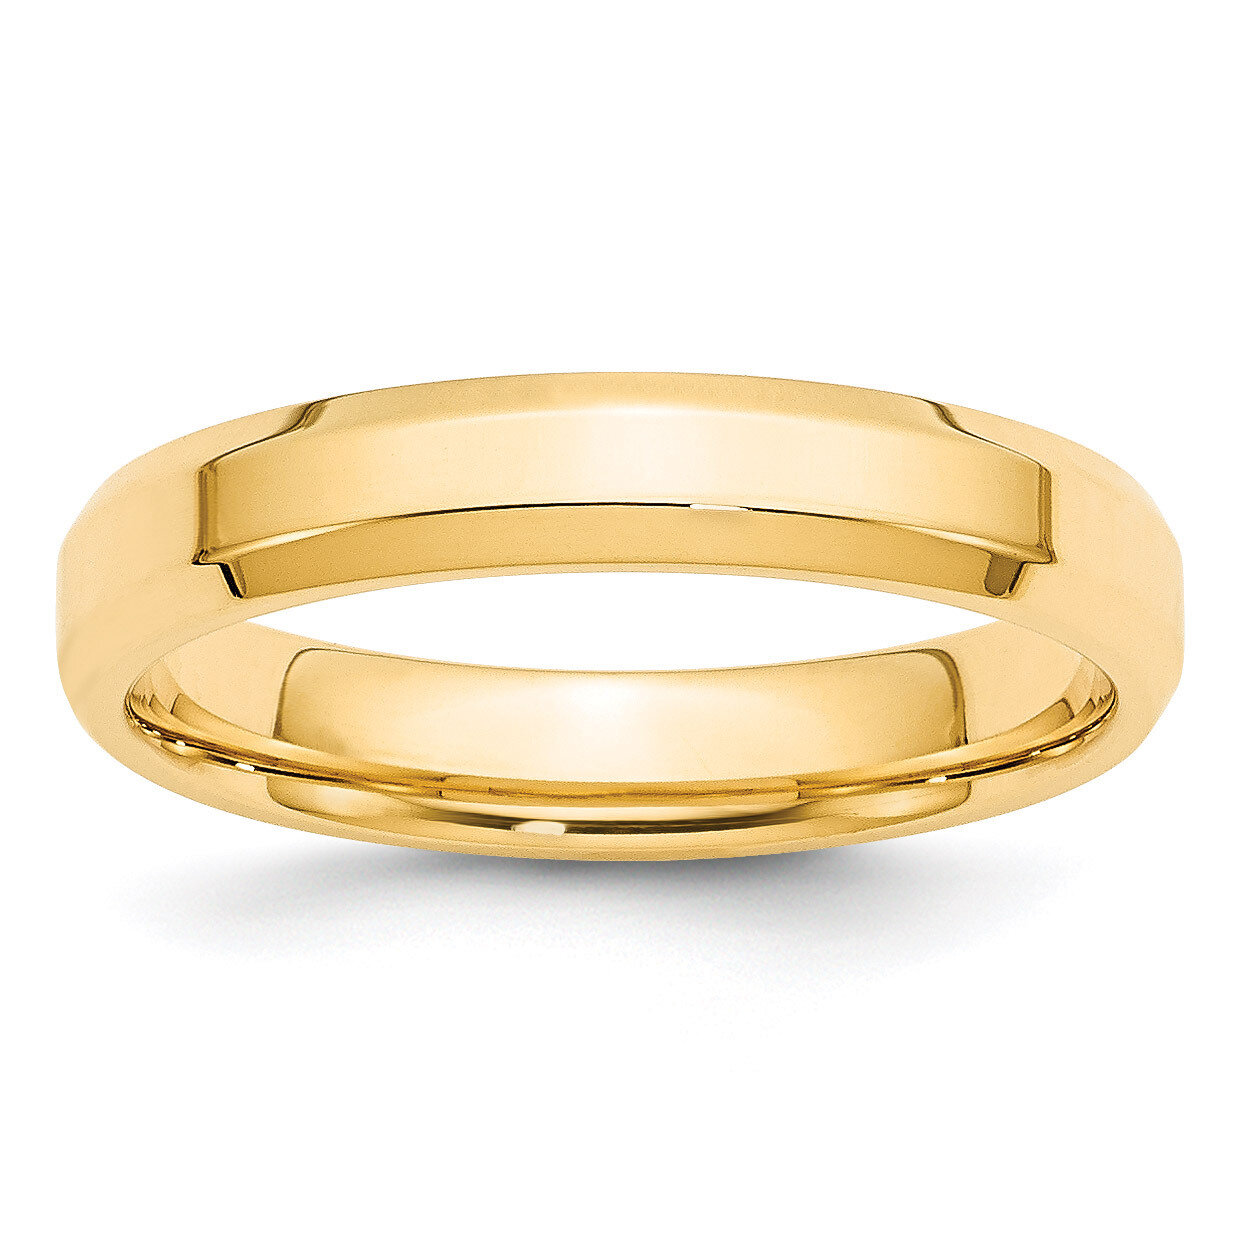 4mm Bevel Edge Comfort Fit Band 14k Yellow Gold Engravable BEC040-10